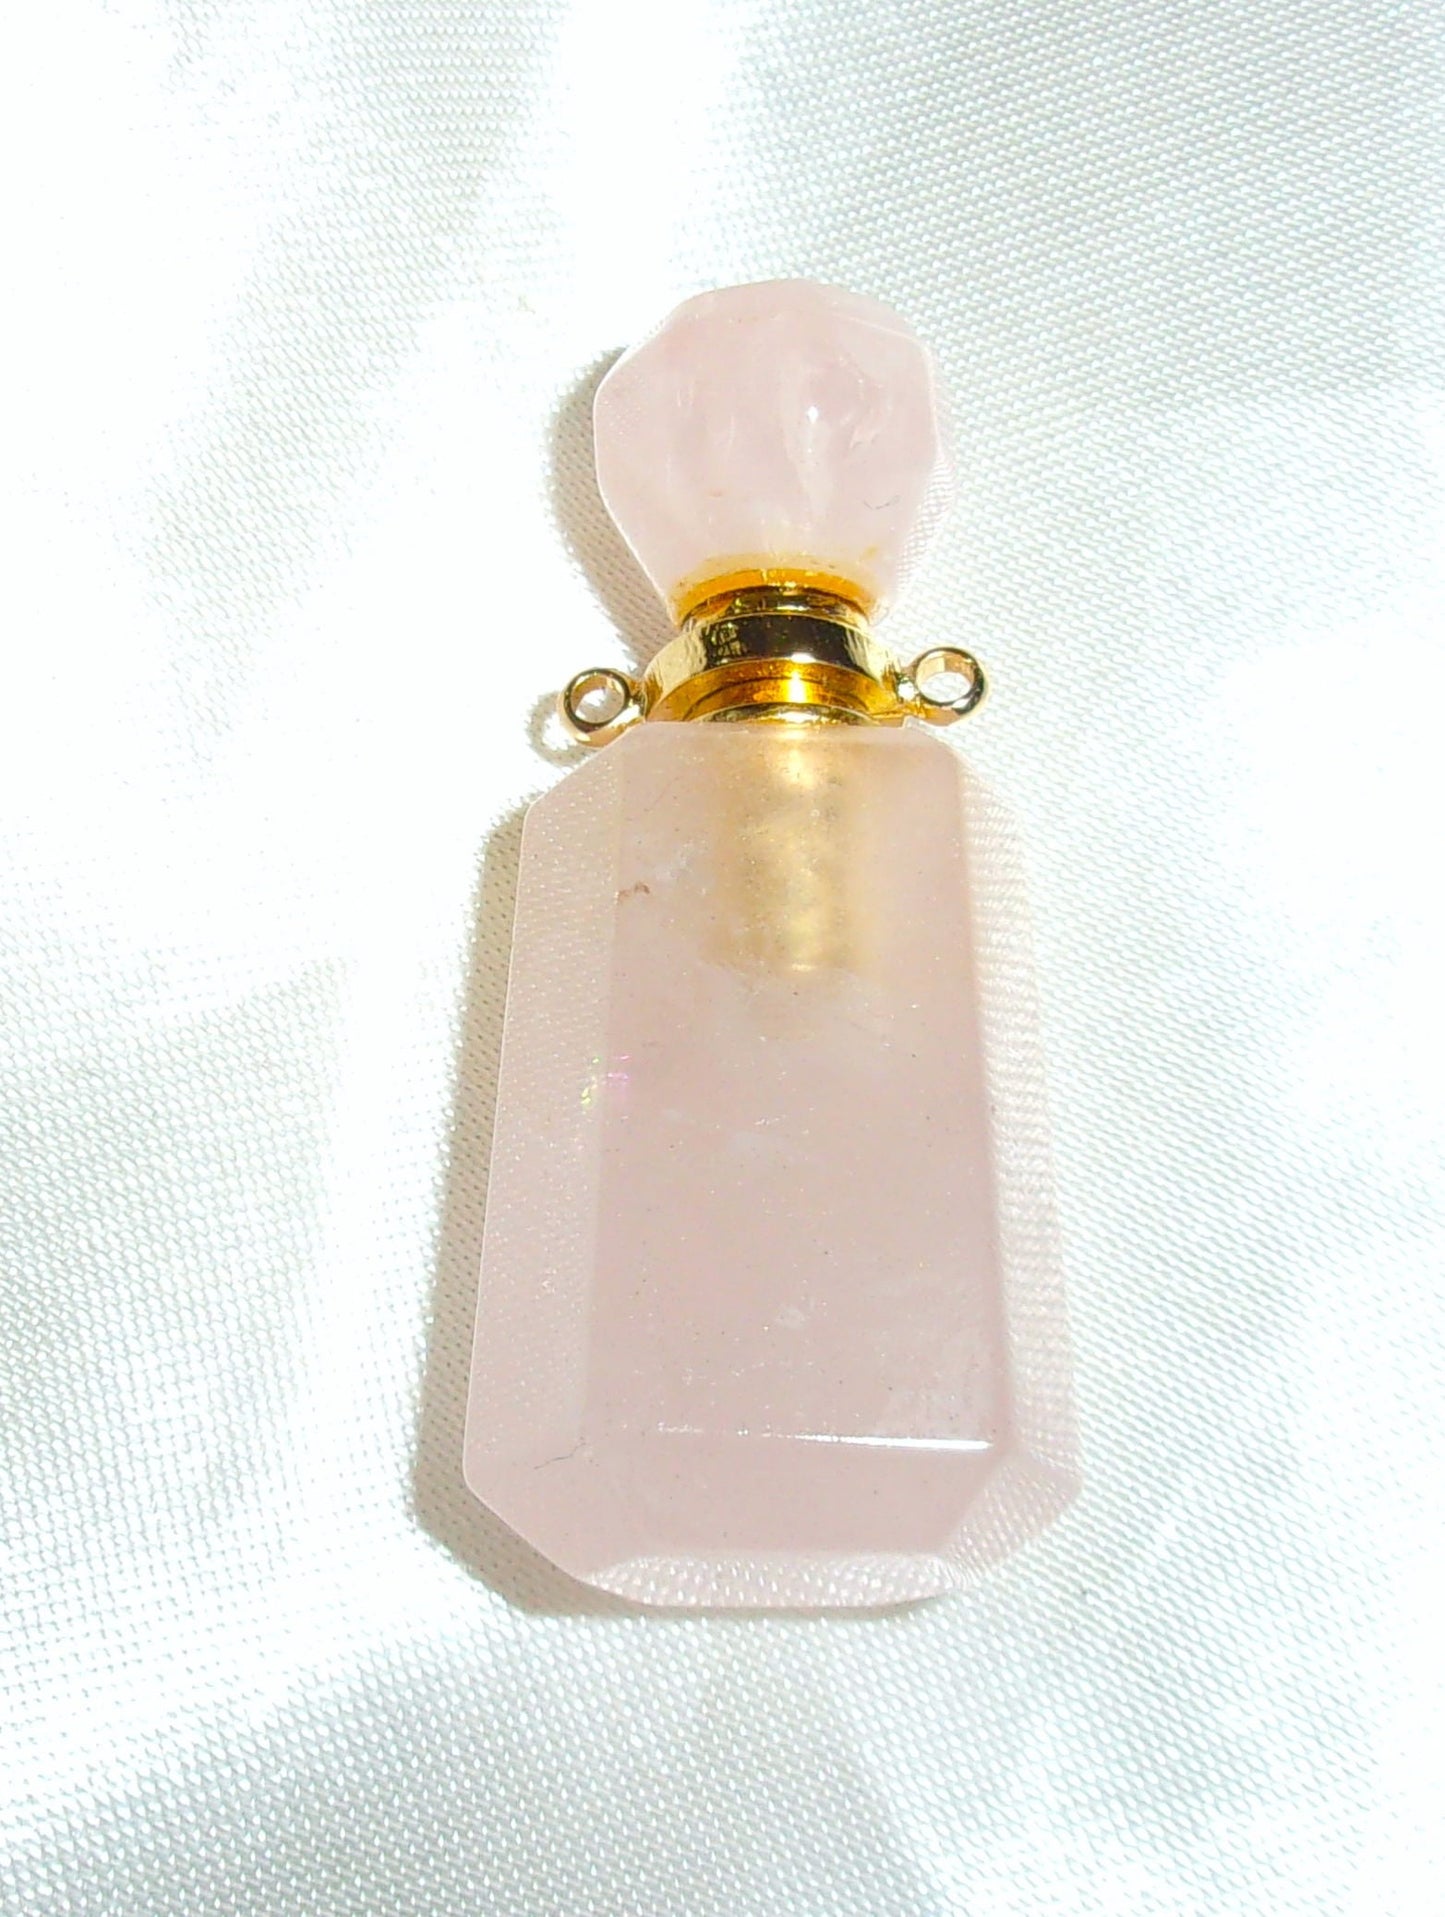 Rare Female Queen Si’lat Jinniyah – Pretty Pink Glass Bottle or Direct / Remote Bind